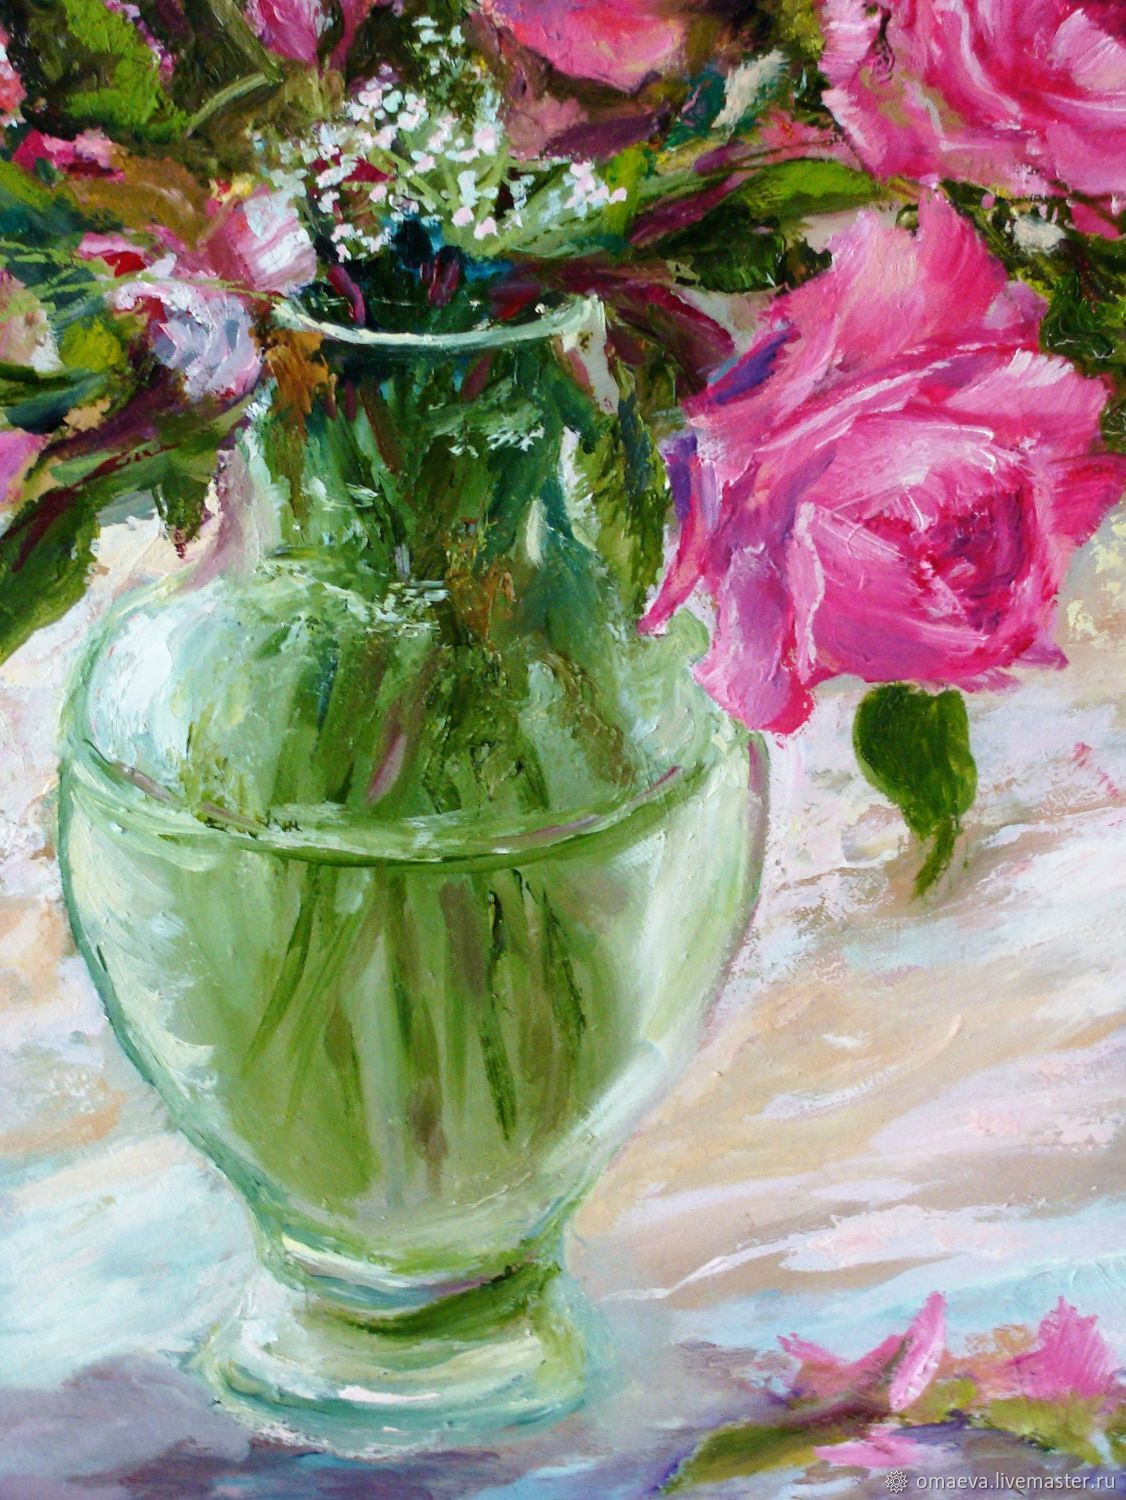 25 Stylish Flowers In A Round Vase 2024 free download flowers in a round vase of paintingoilroses shop online on livemaster with shipping throughout flower paintings handmade paintingoilroses oma eva